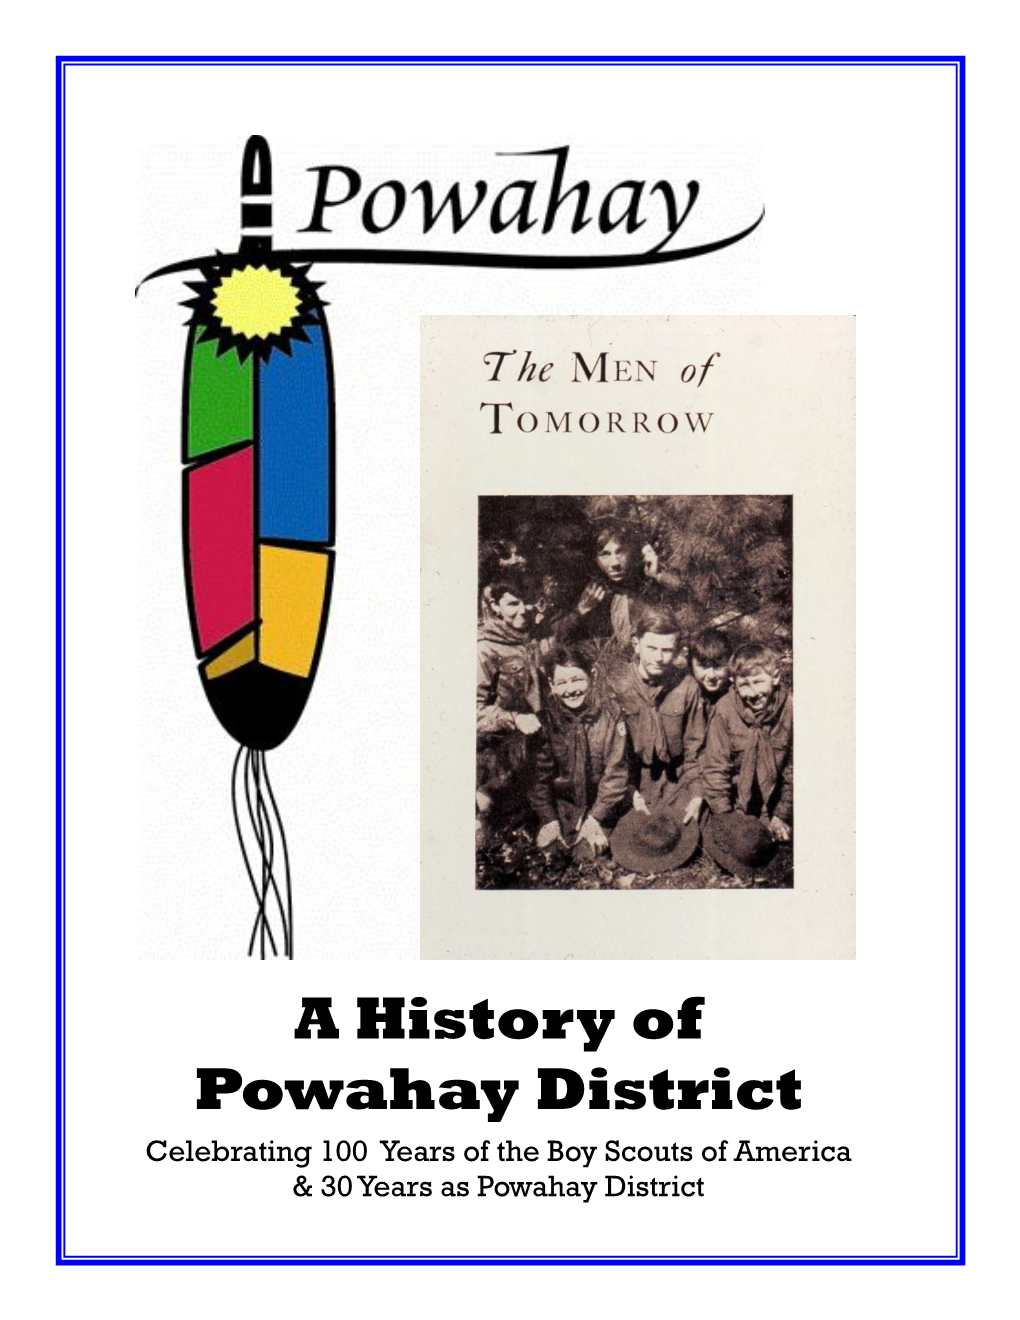 A History of Powahay District